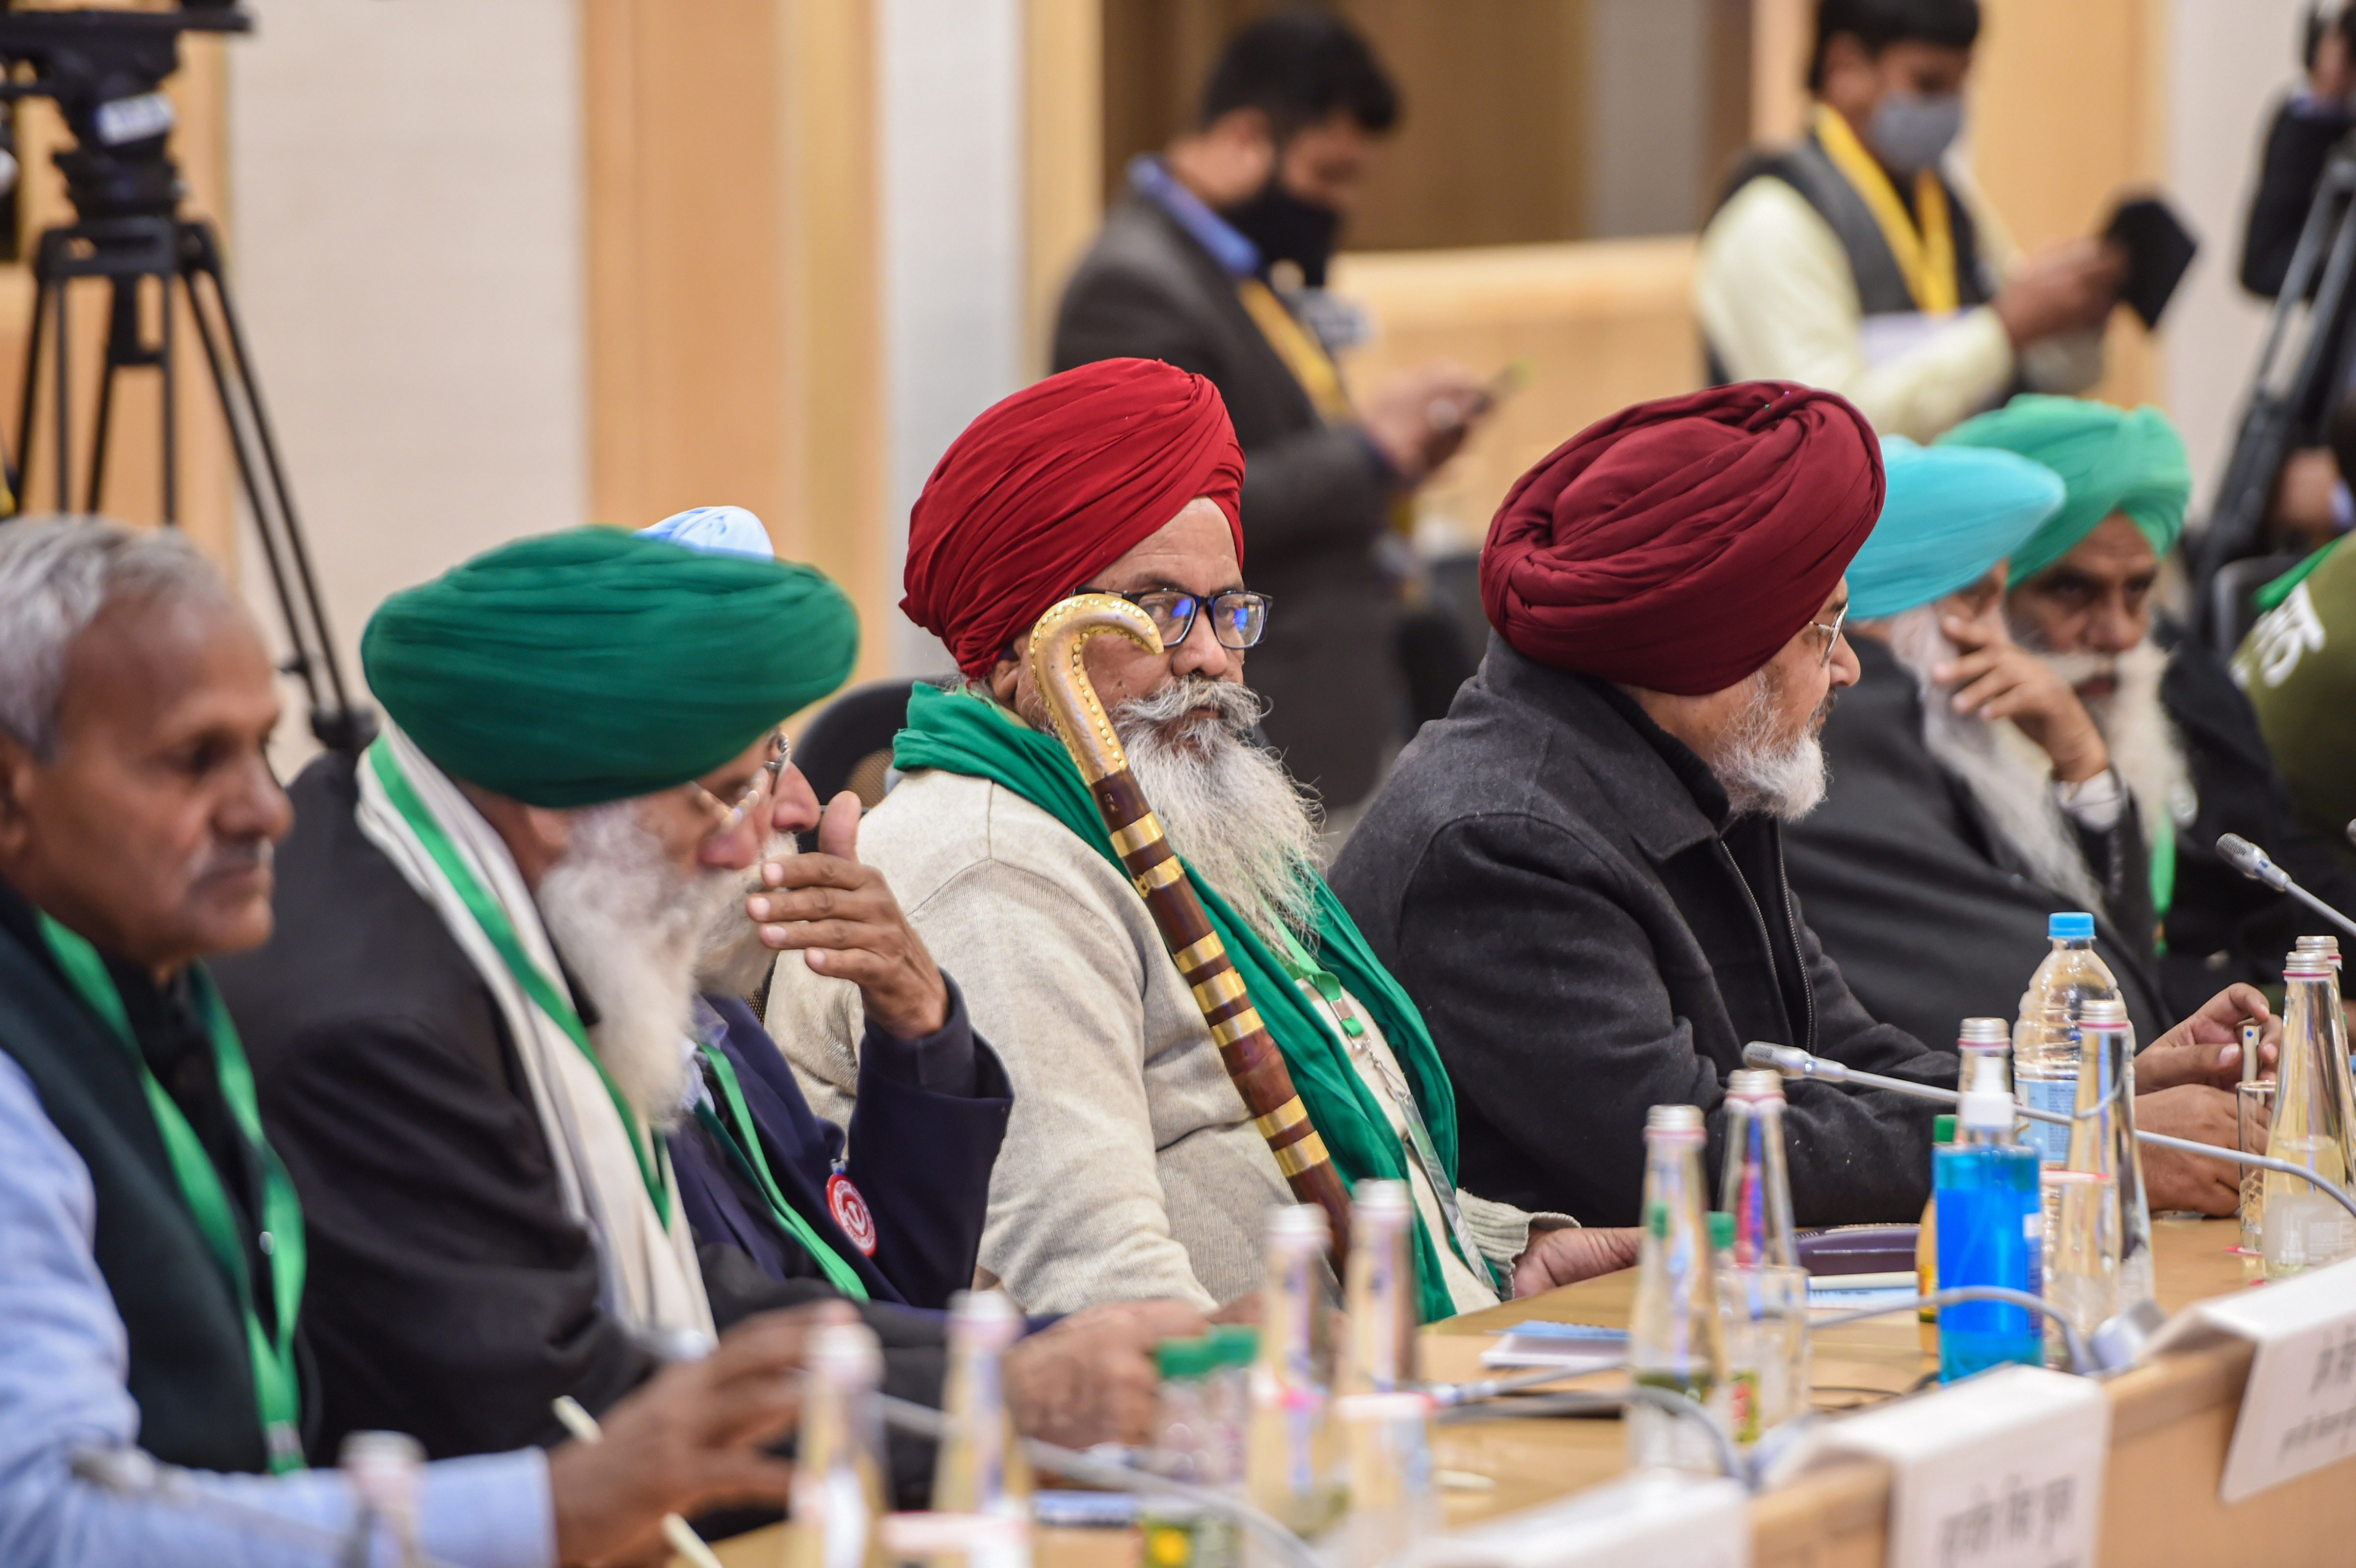 Farmers leaders during a meeting with Union Minister for Agriculture & Farmers Welfare Narendra Singh Tomar (unseen) and Union Minister for Commerce and Industry Piyush Goyal (unseen) over the new farm laws, at Vigyan Bhawan in New Delhi, Wednesday, Dec. 30, 2020. Credit: PTI Photo